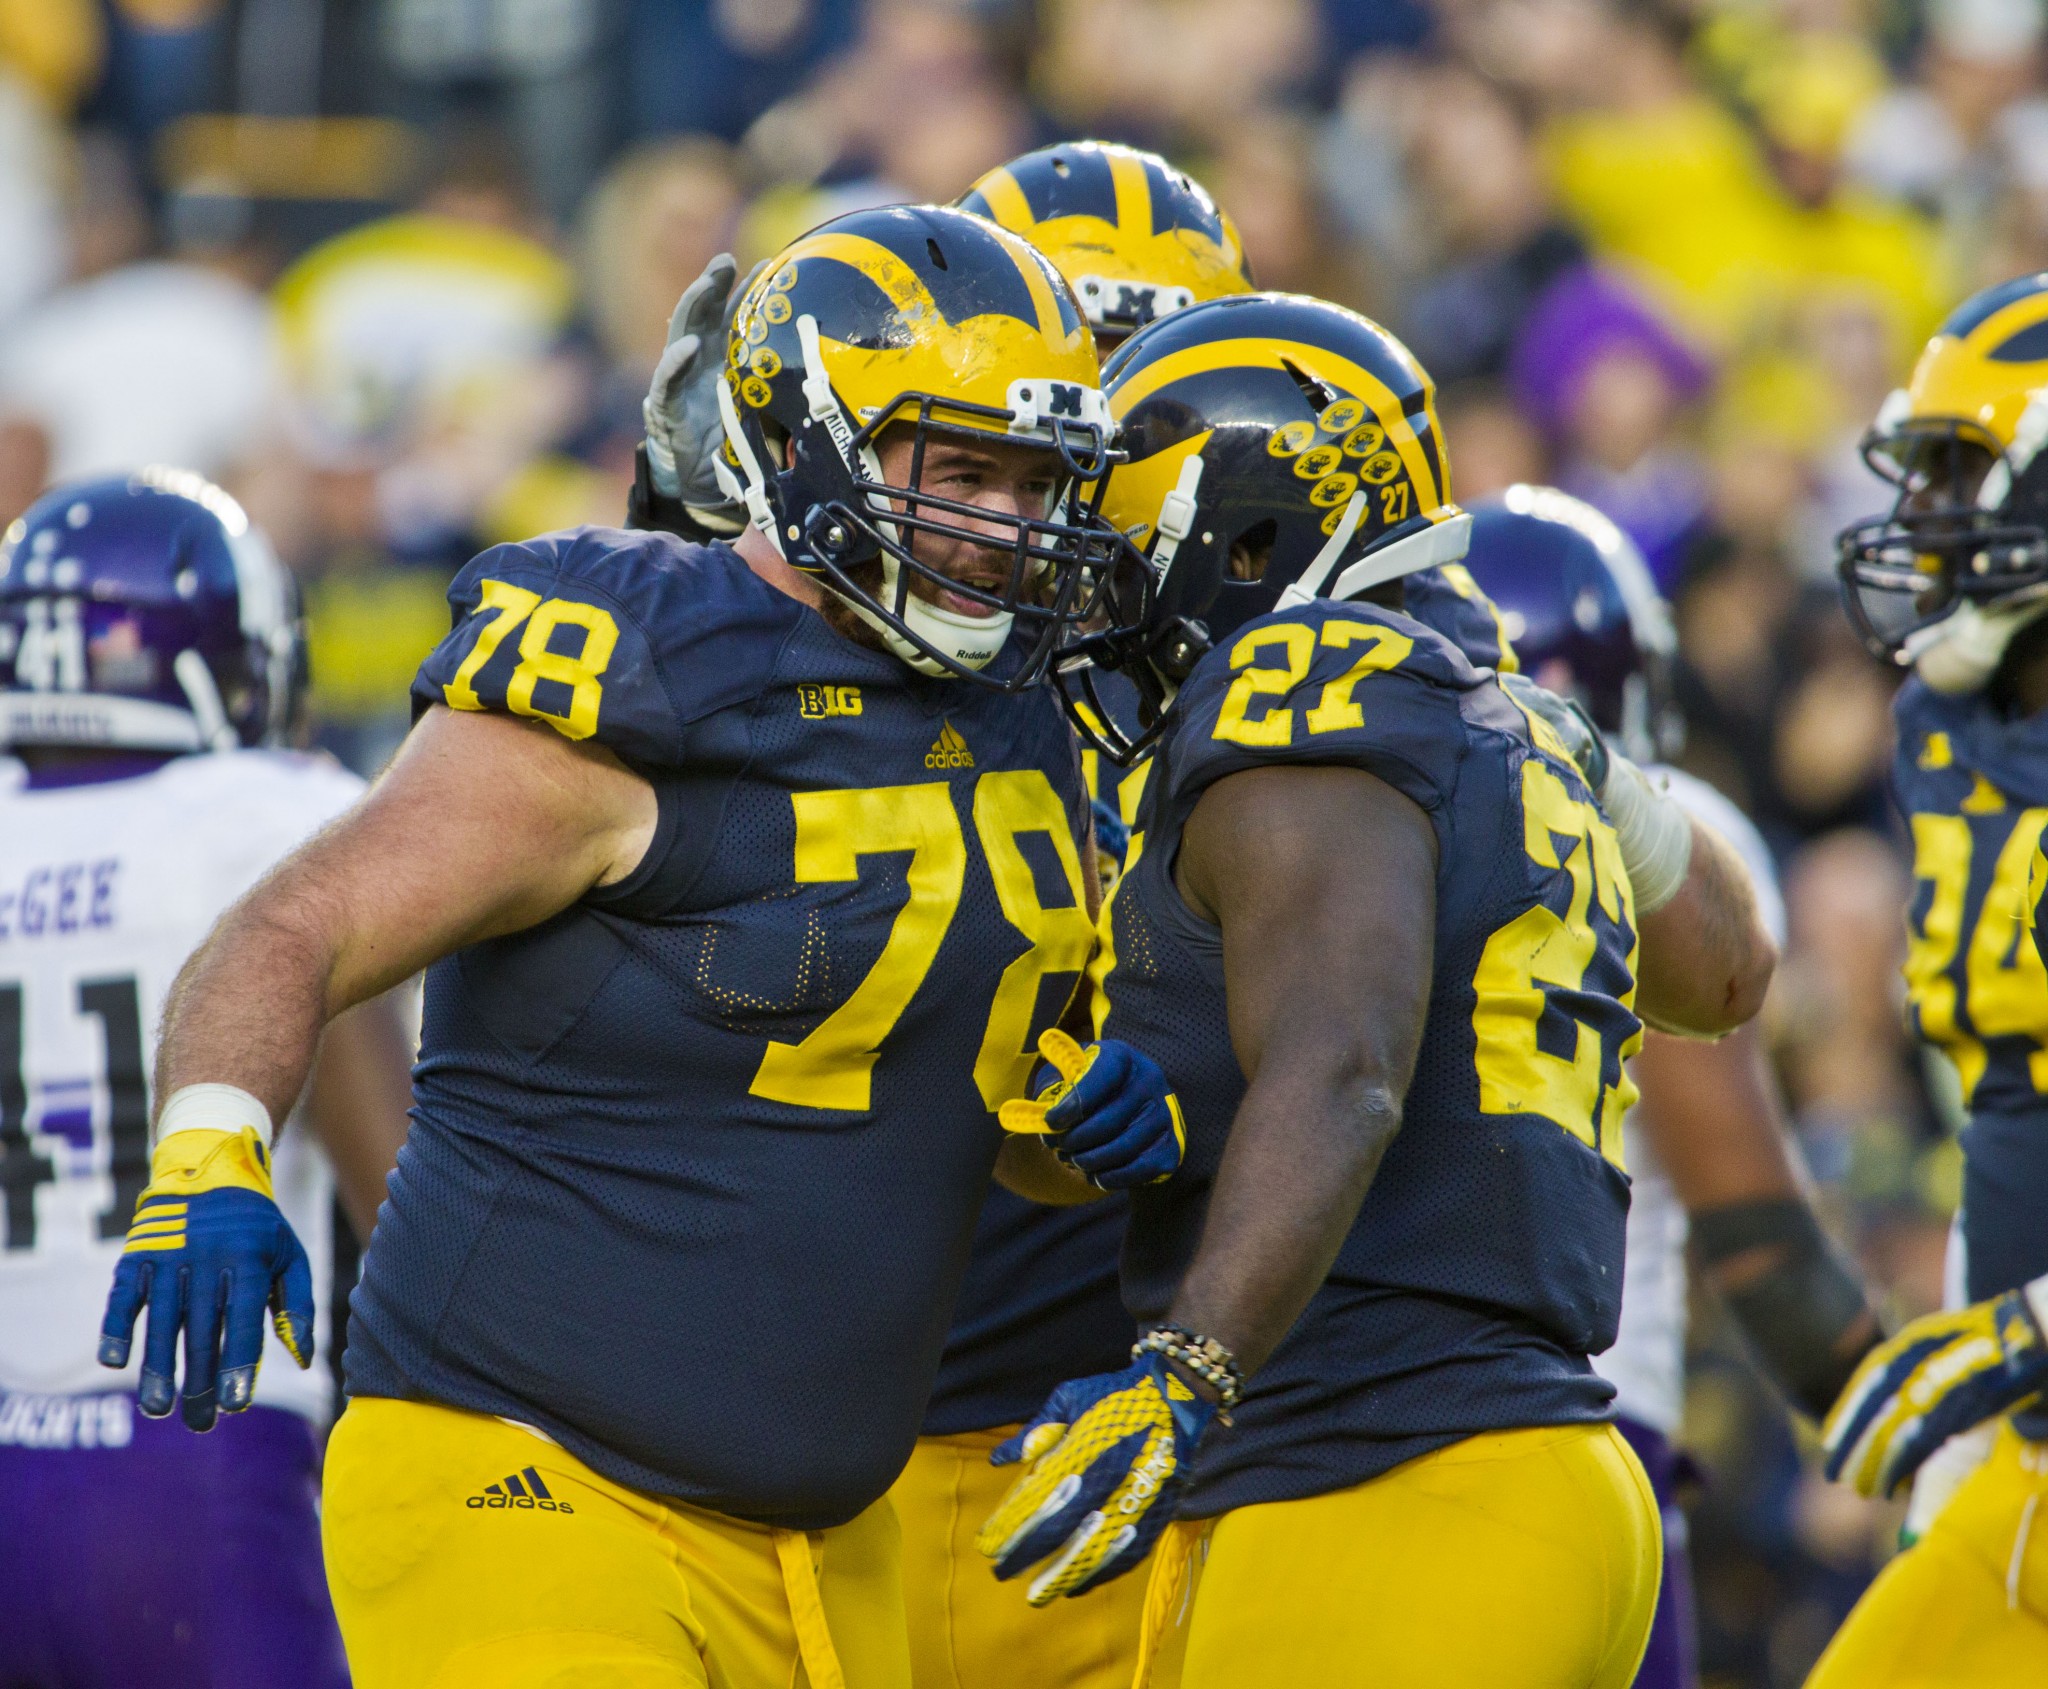 Michigan offensive lineman Erik Magnuson (78) celebrates a rushing touchdown by running back Derrick Green (27) in the fourth quarter of an NCAA college football game against Northwestern in Ann Arbor, Mich., Saturday, Oct. 10, 2015. Michigan won 38-0. (AP Photo/Tony Ding)